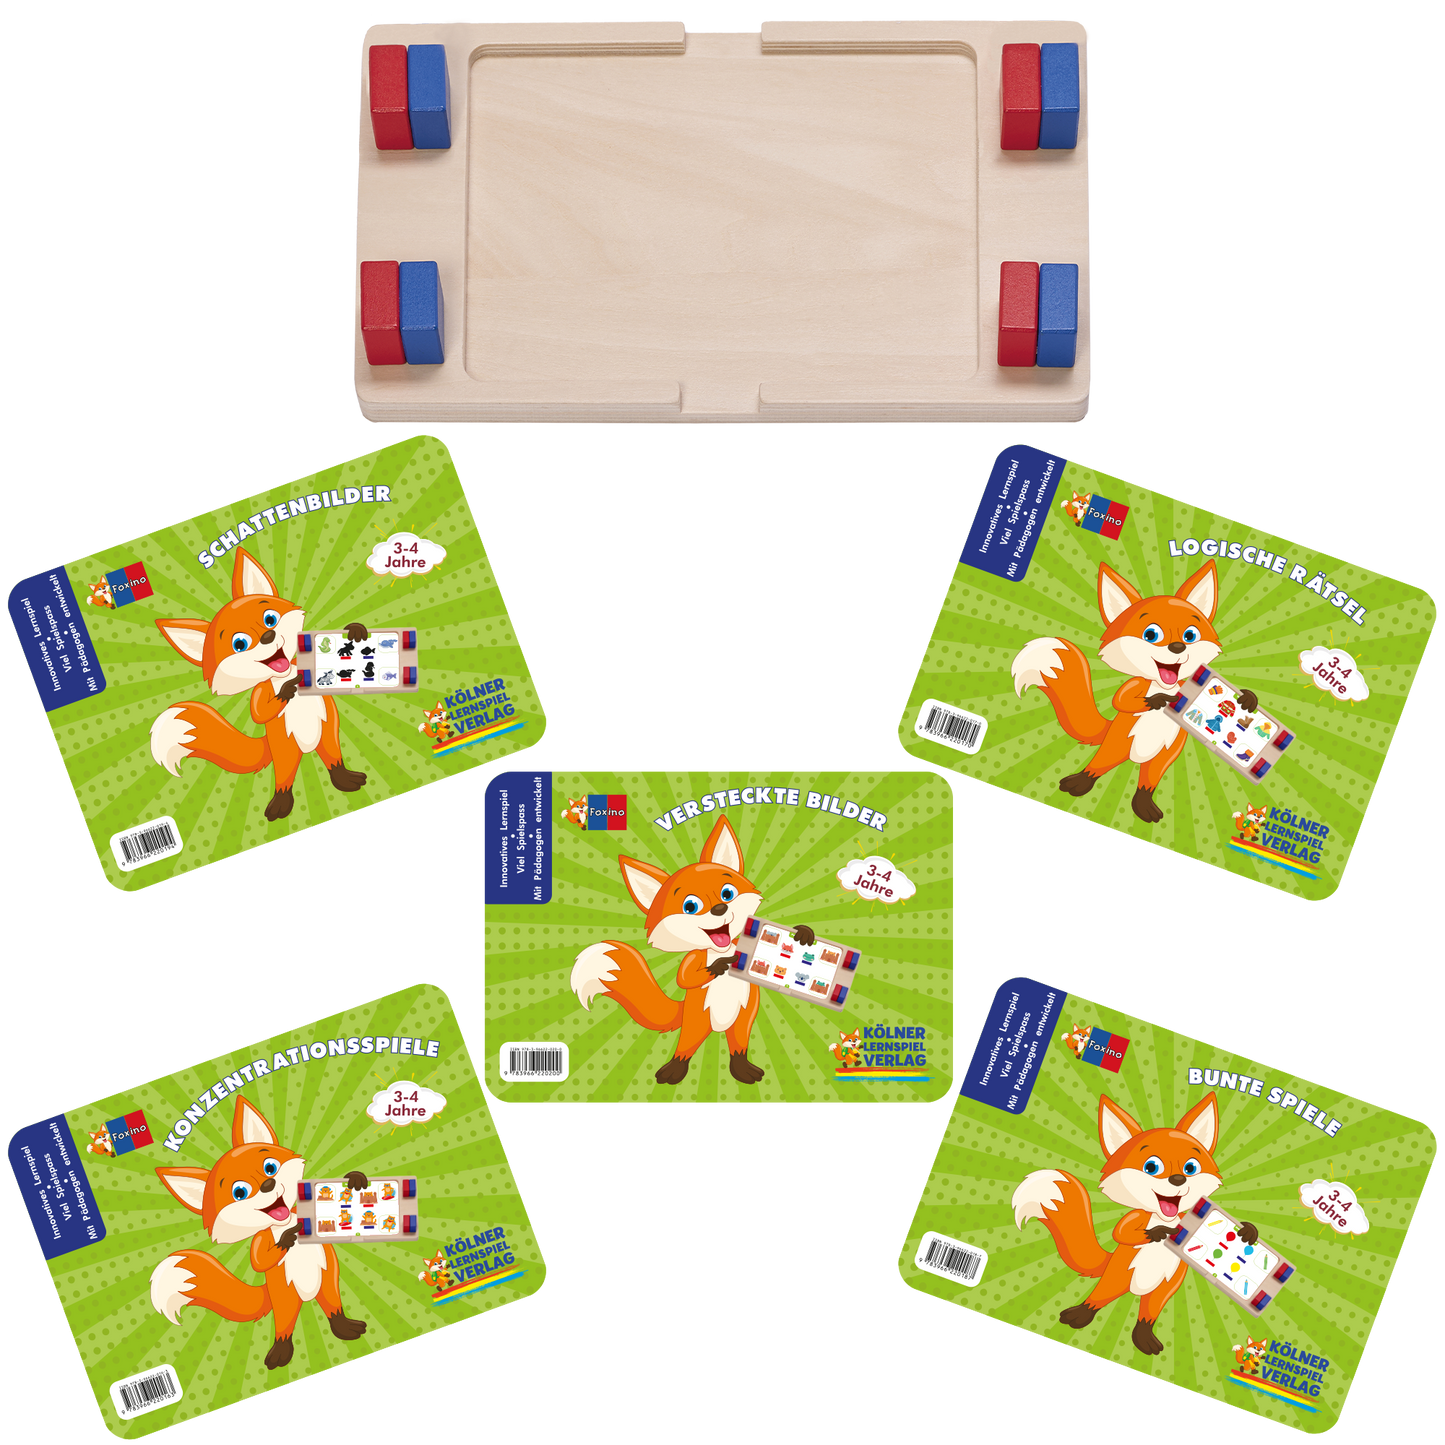 Foxino starter set 3-4 years with 5 decks of cards 